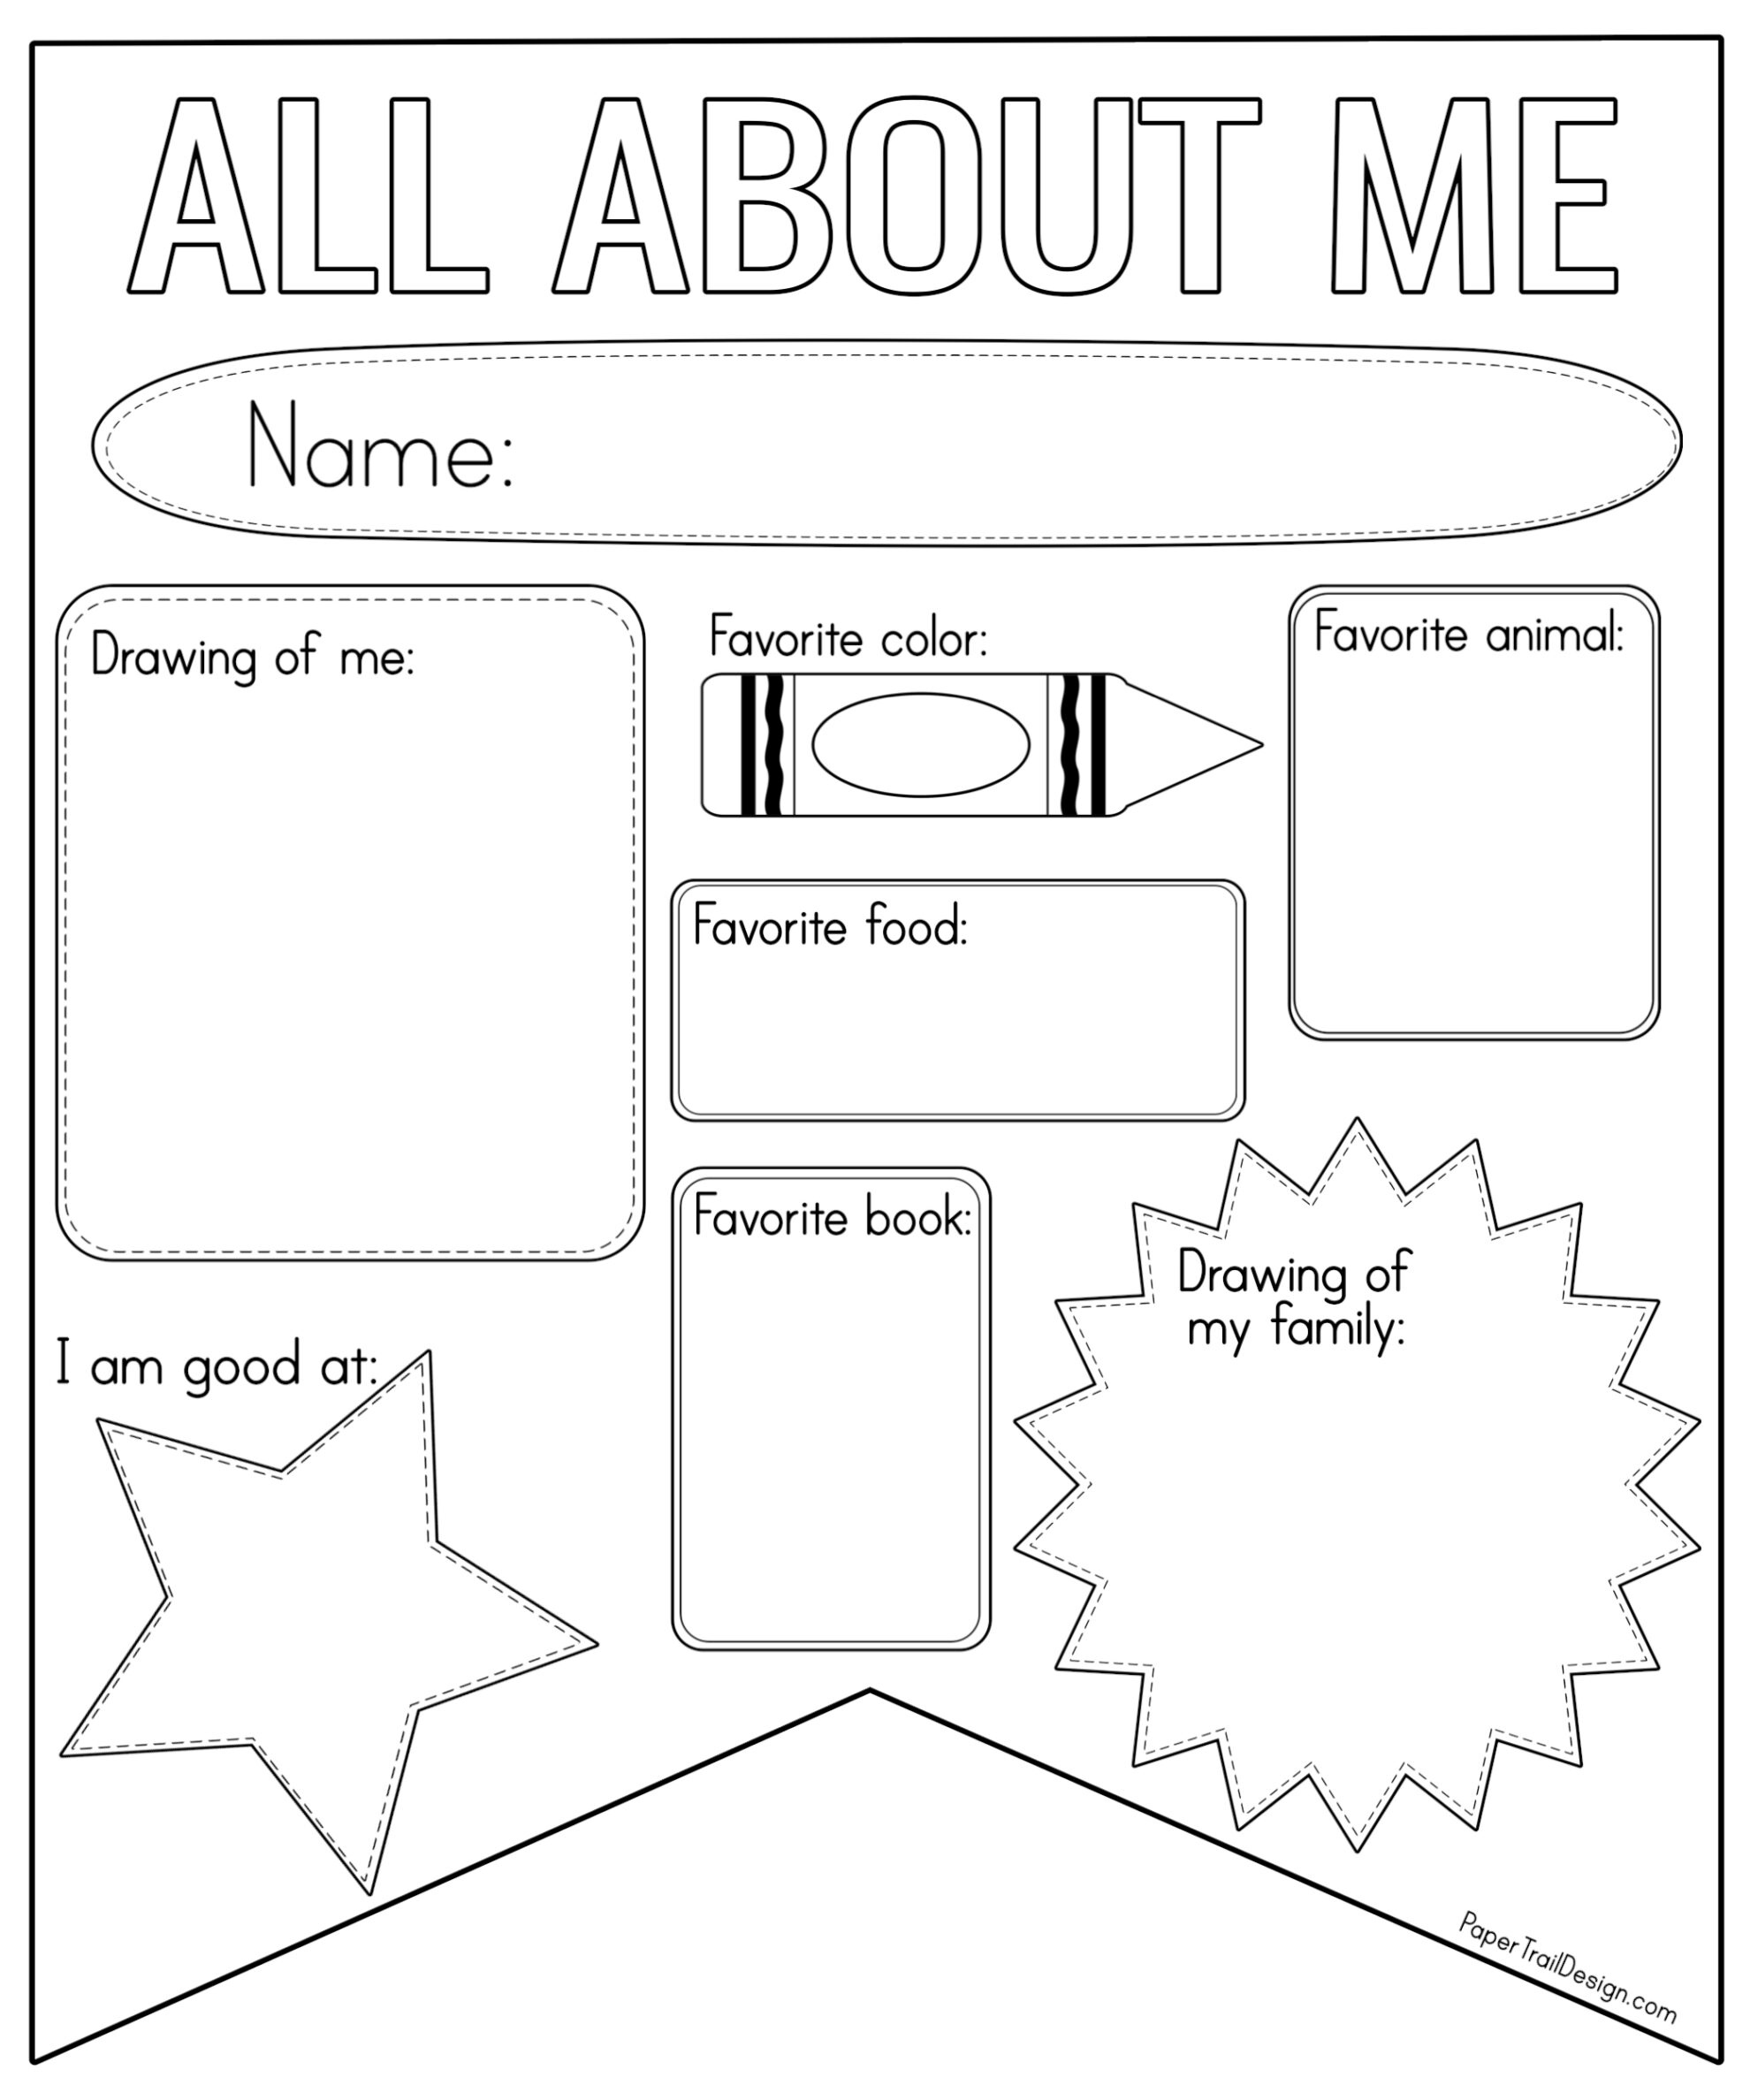 all-about-me-gazette-worksheet-all-about-me-worksheets